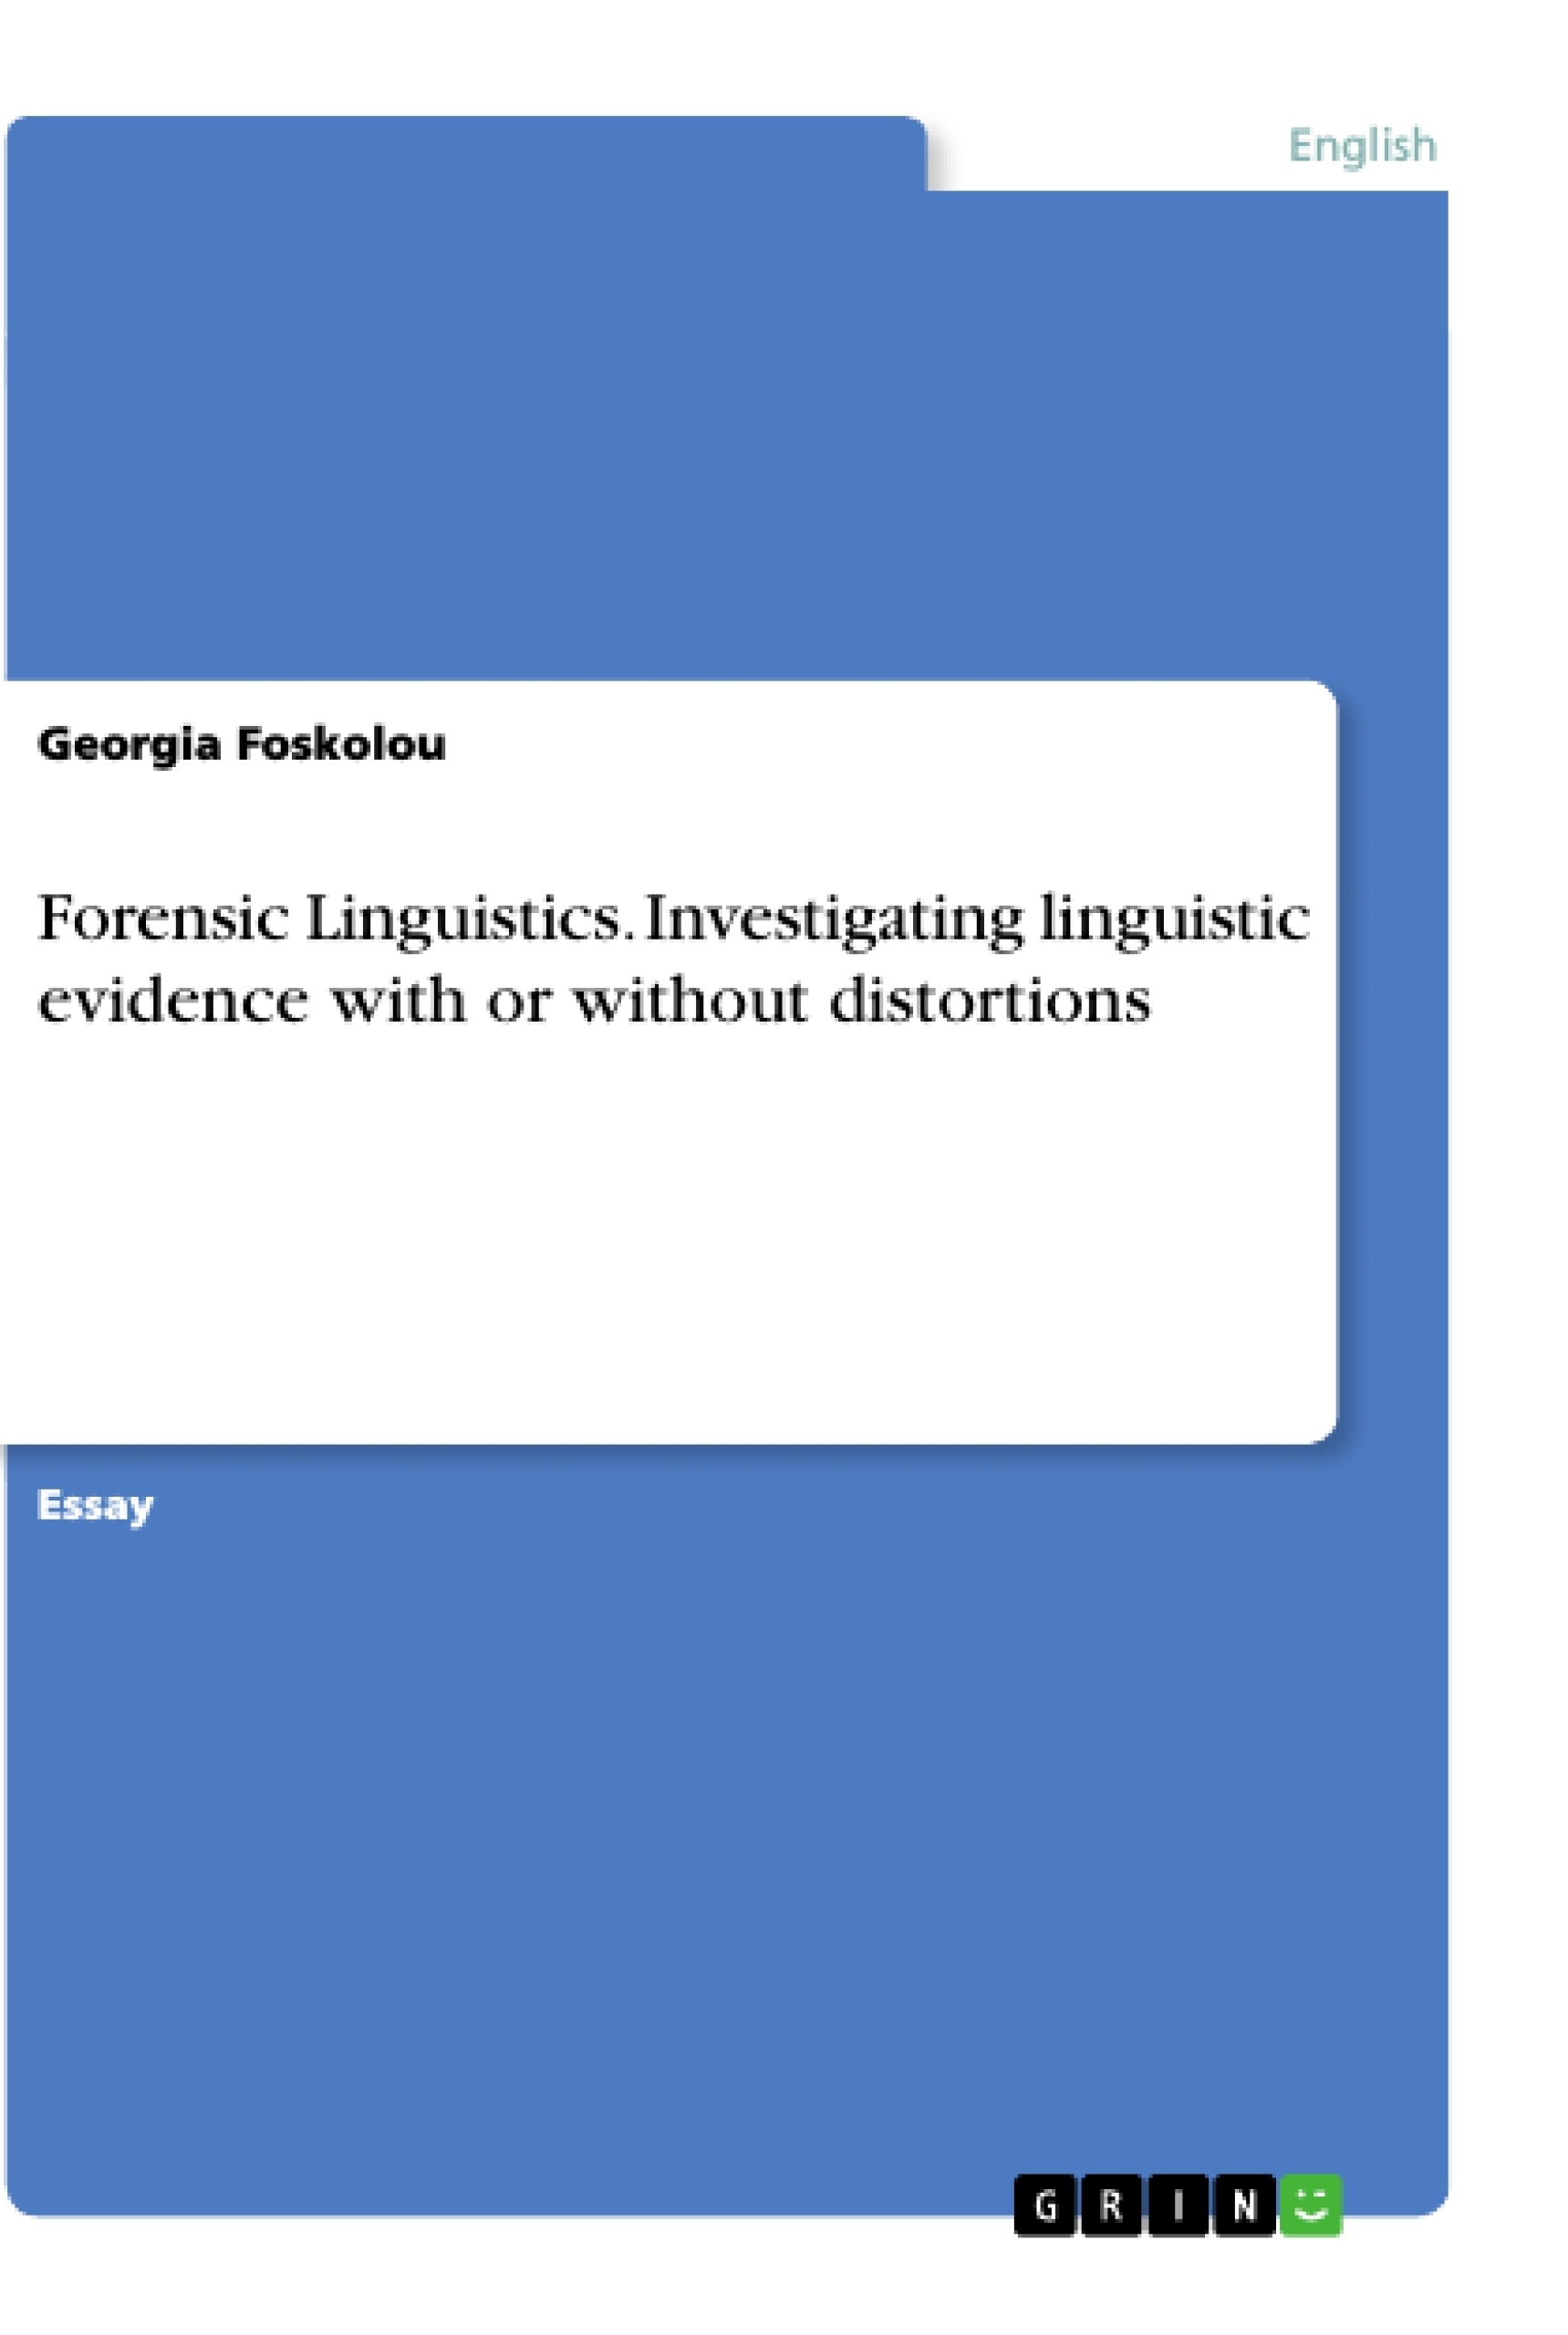 research questions about forensic linguistics